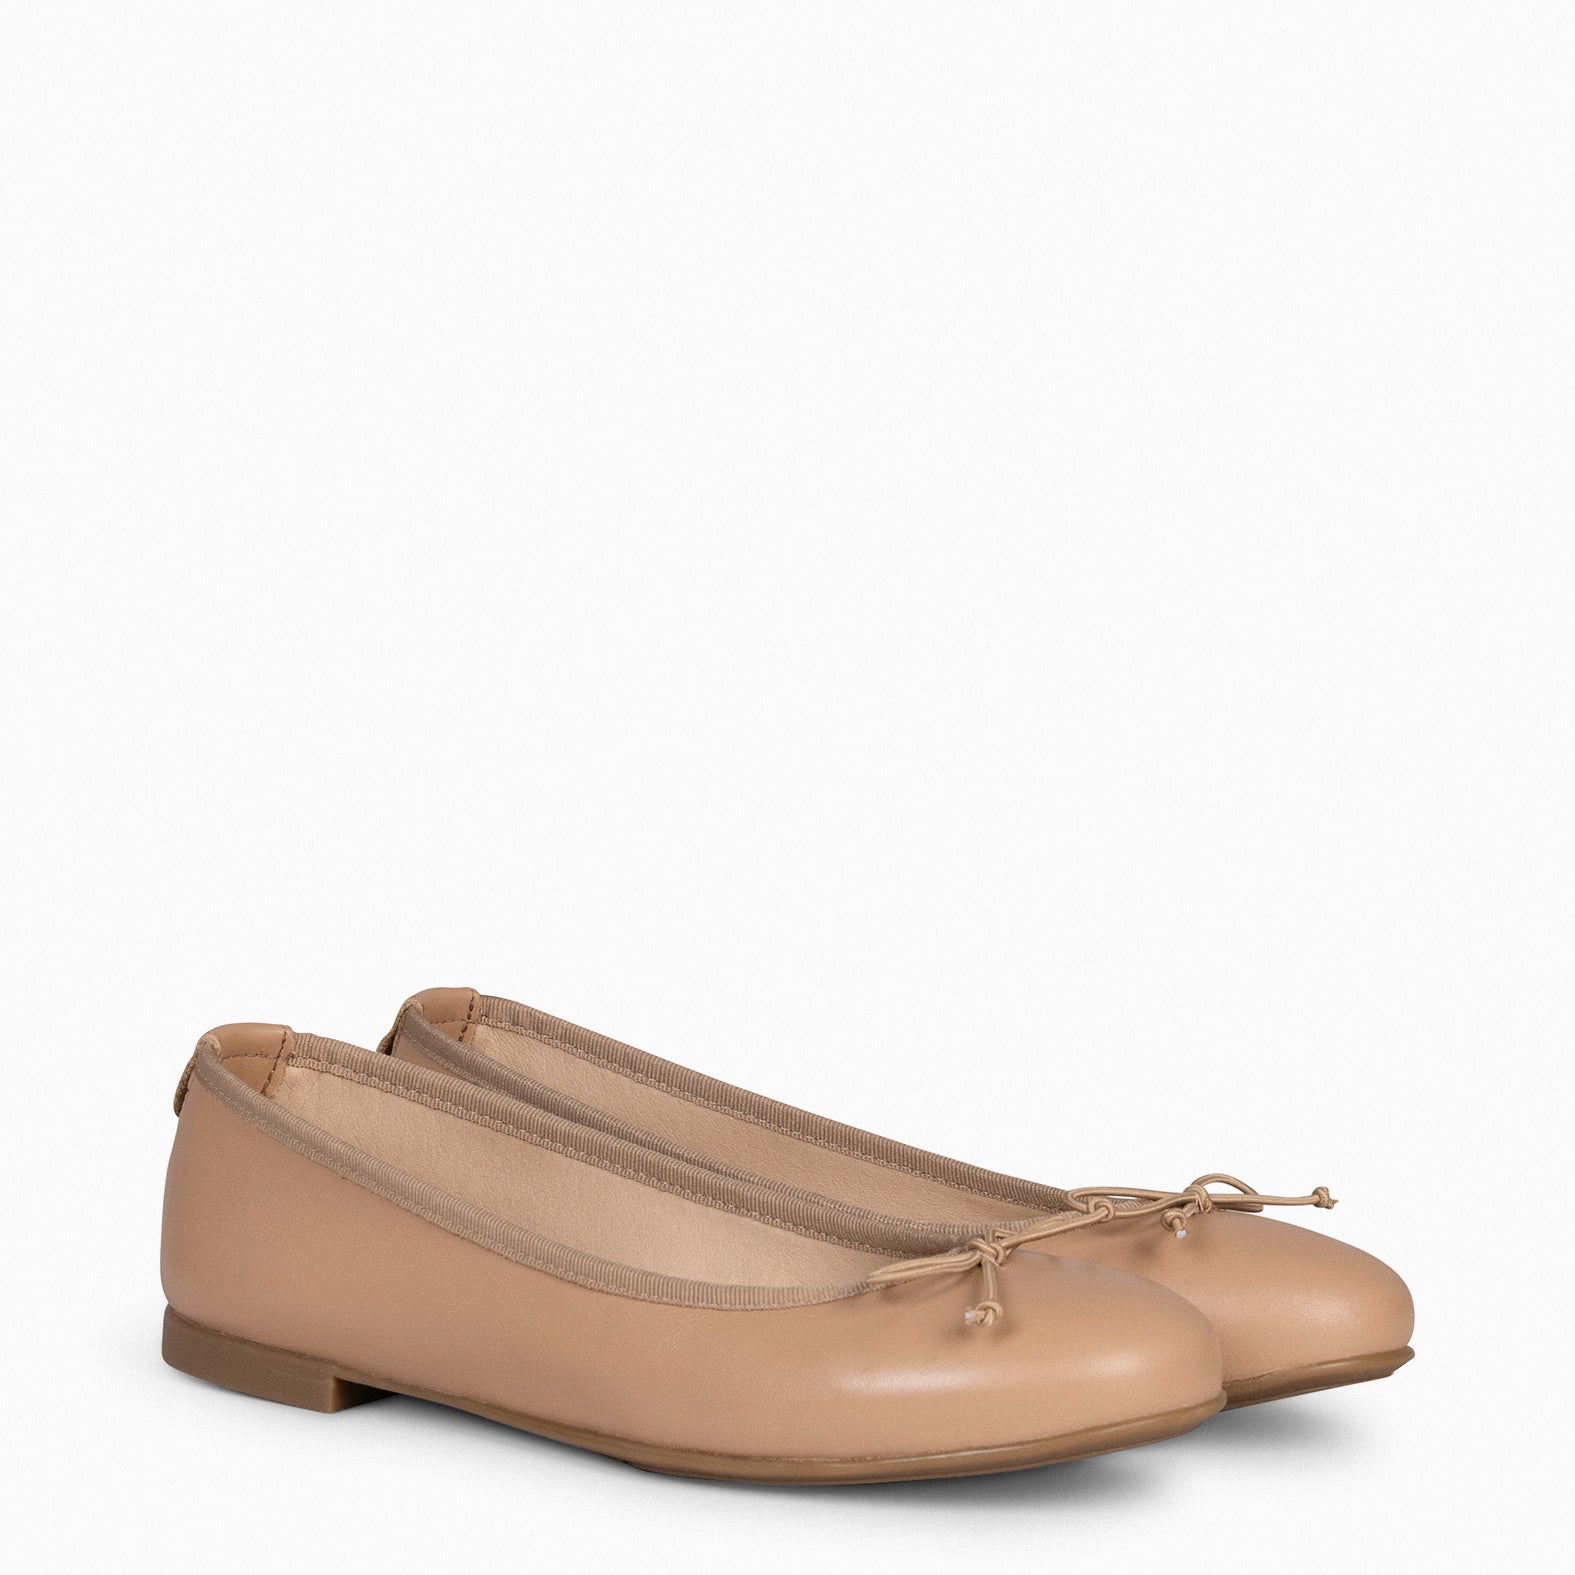 HELENE – NUDE Ballerinas with lace 